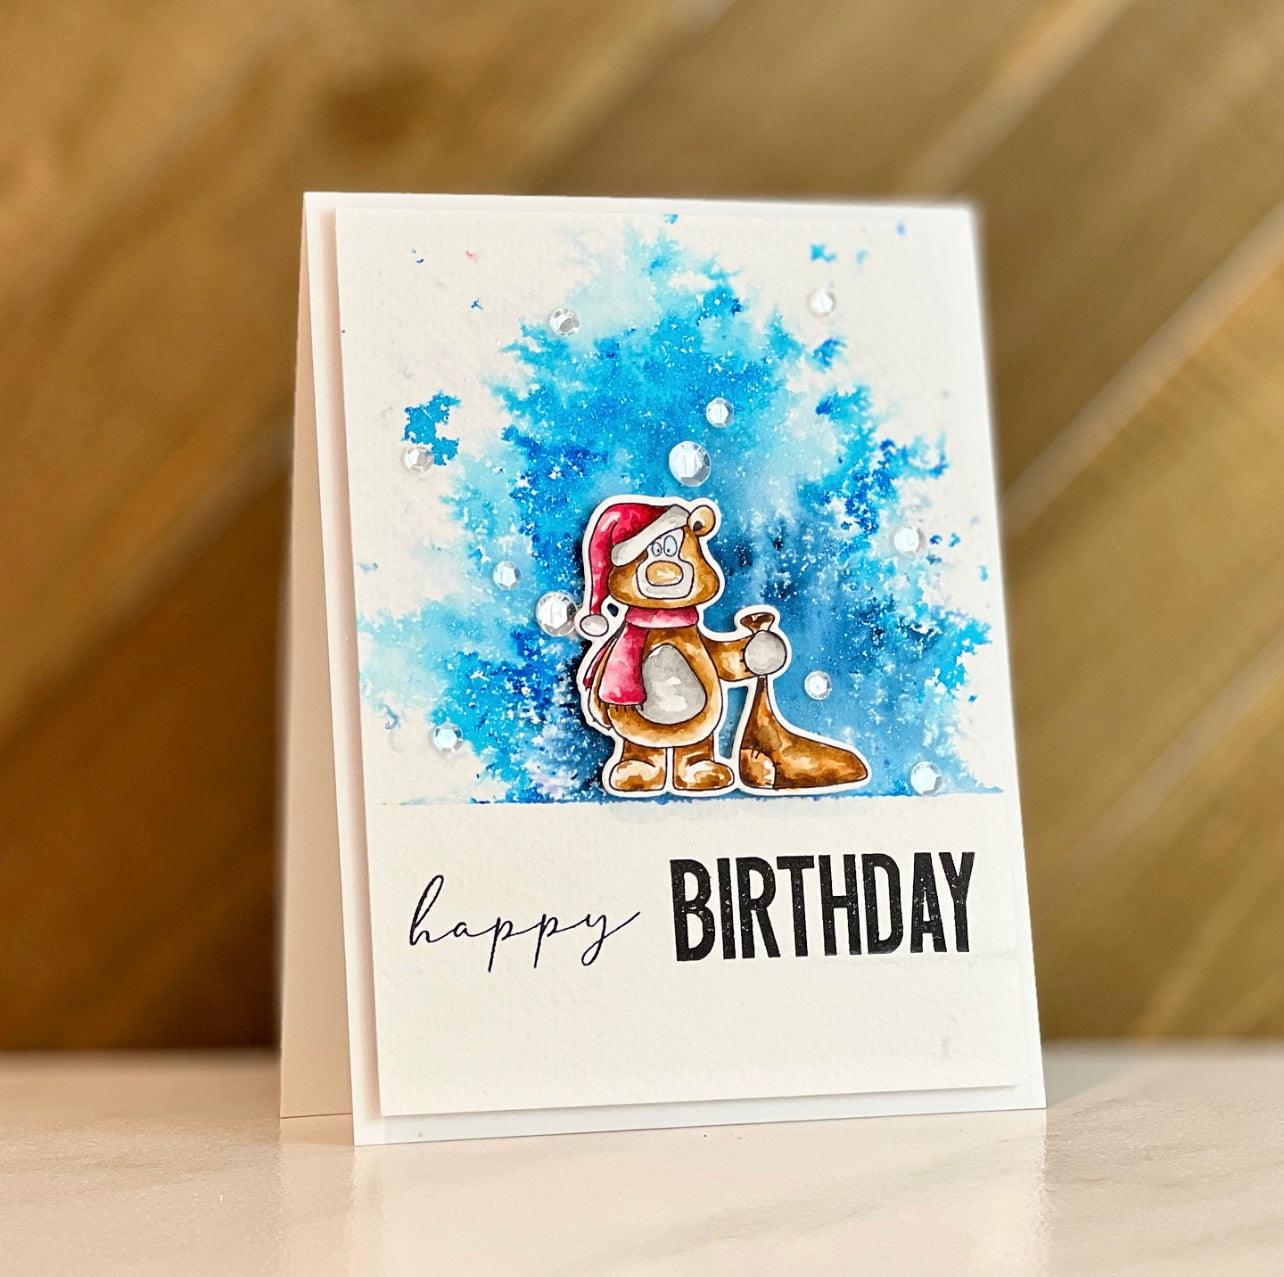 alex-syberia-designs-birthday-wishes-stamp-set-cardmaking-scrapbooking-birthday-celebrate-your-day-sentiments-bear-winter-cards-birthday-stamps-watercoloring